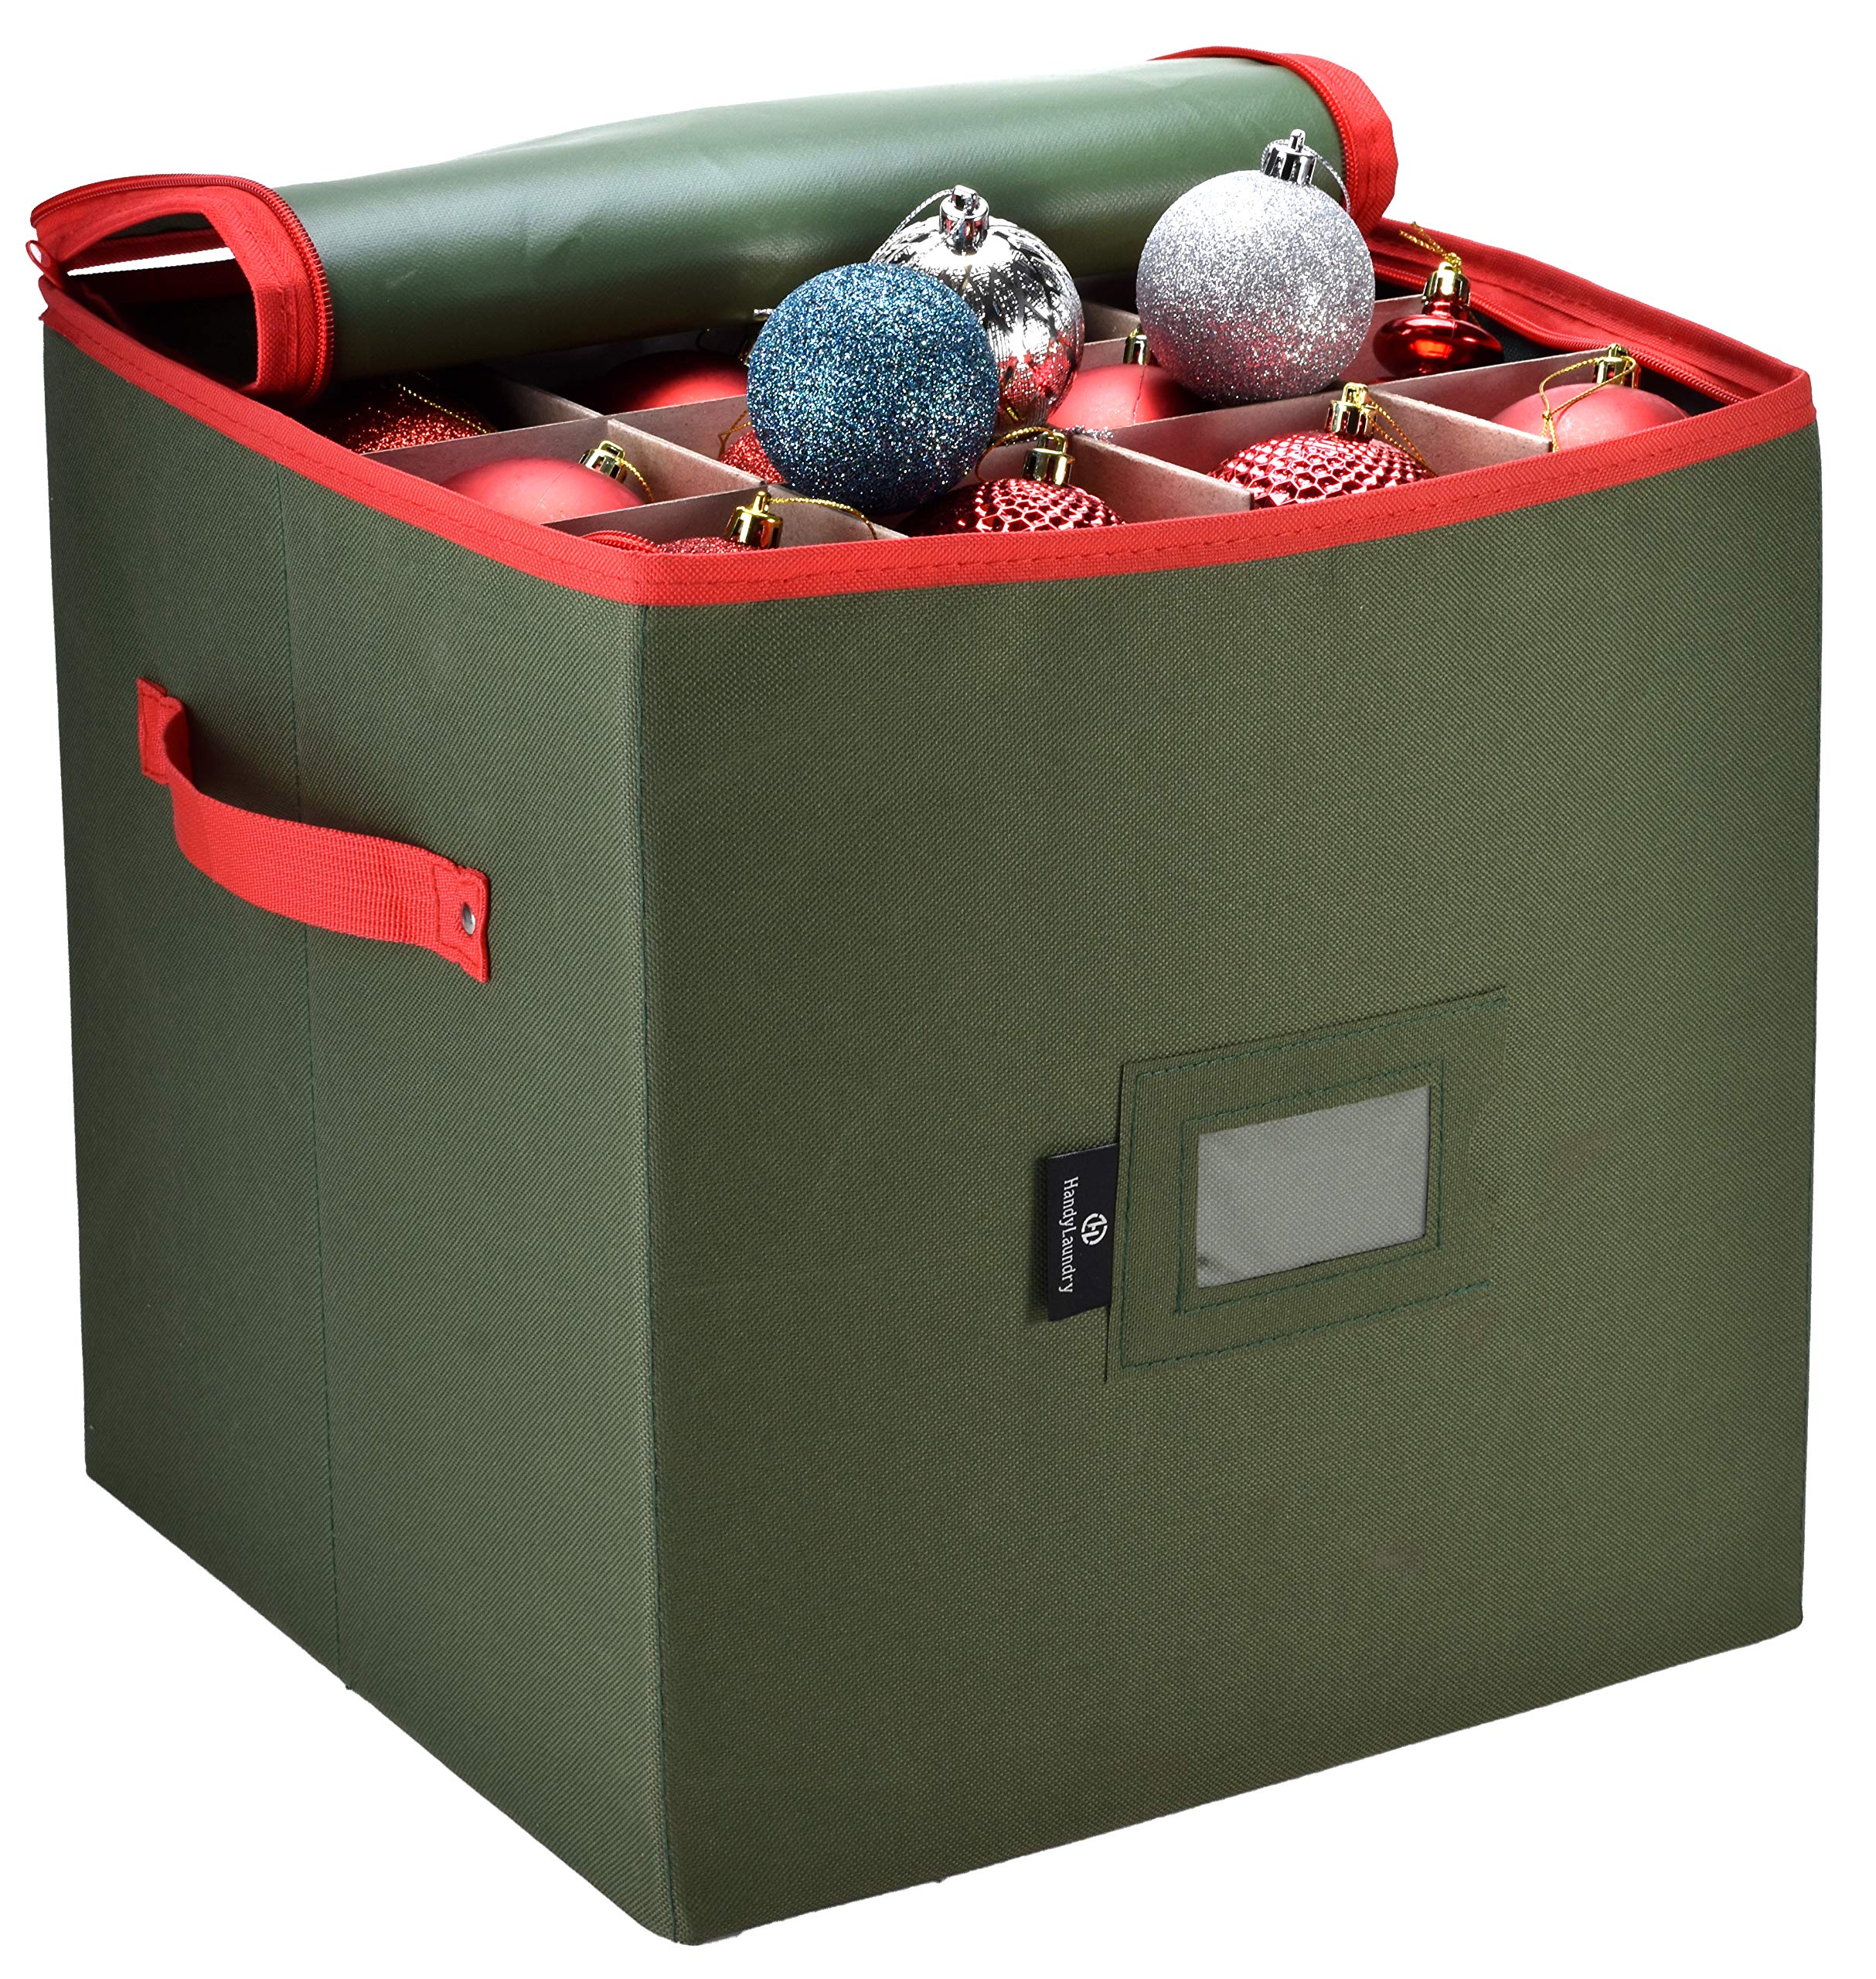 Book Cover Christmas Ornament Storage - Stores up to 64 Holiday Ornaments, Adjustable Dividers, Covered Top, Two Handles. Attractive Storage Box Keeps Holiday Decorations Clean and Dry for Next Season. (Green) Green Zippered-Top